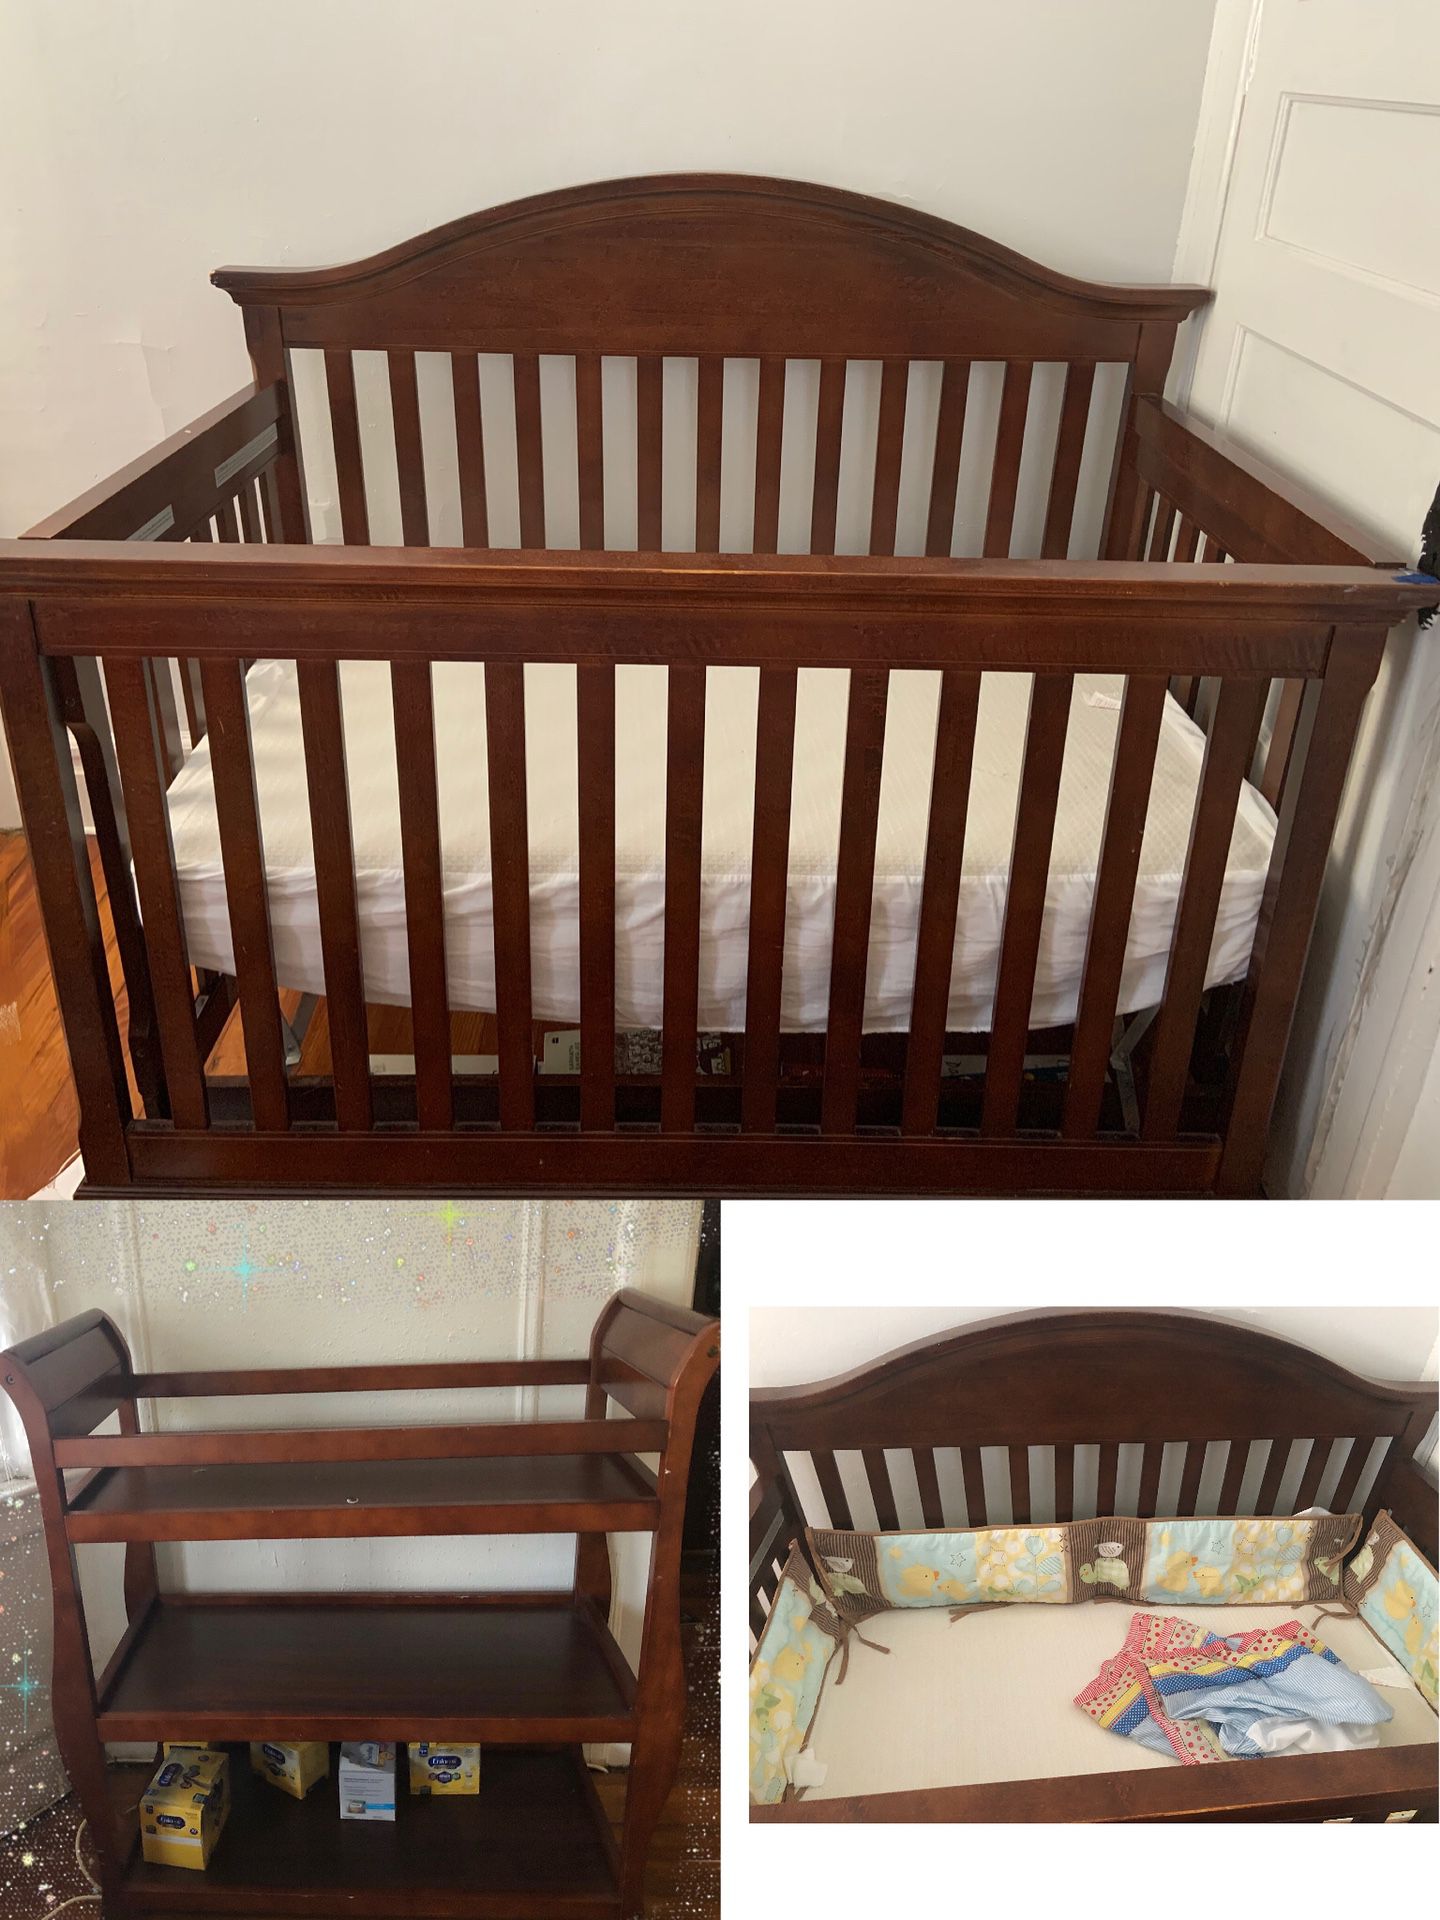 Crib,changing table,mattress and bumper